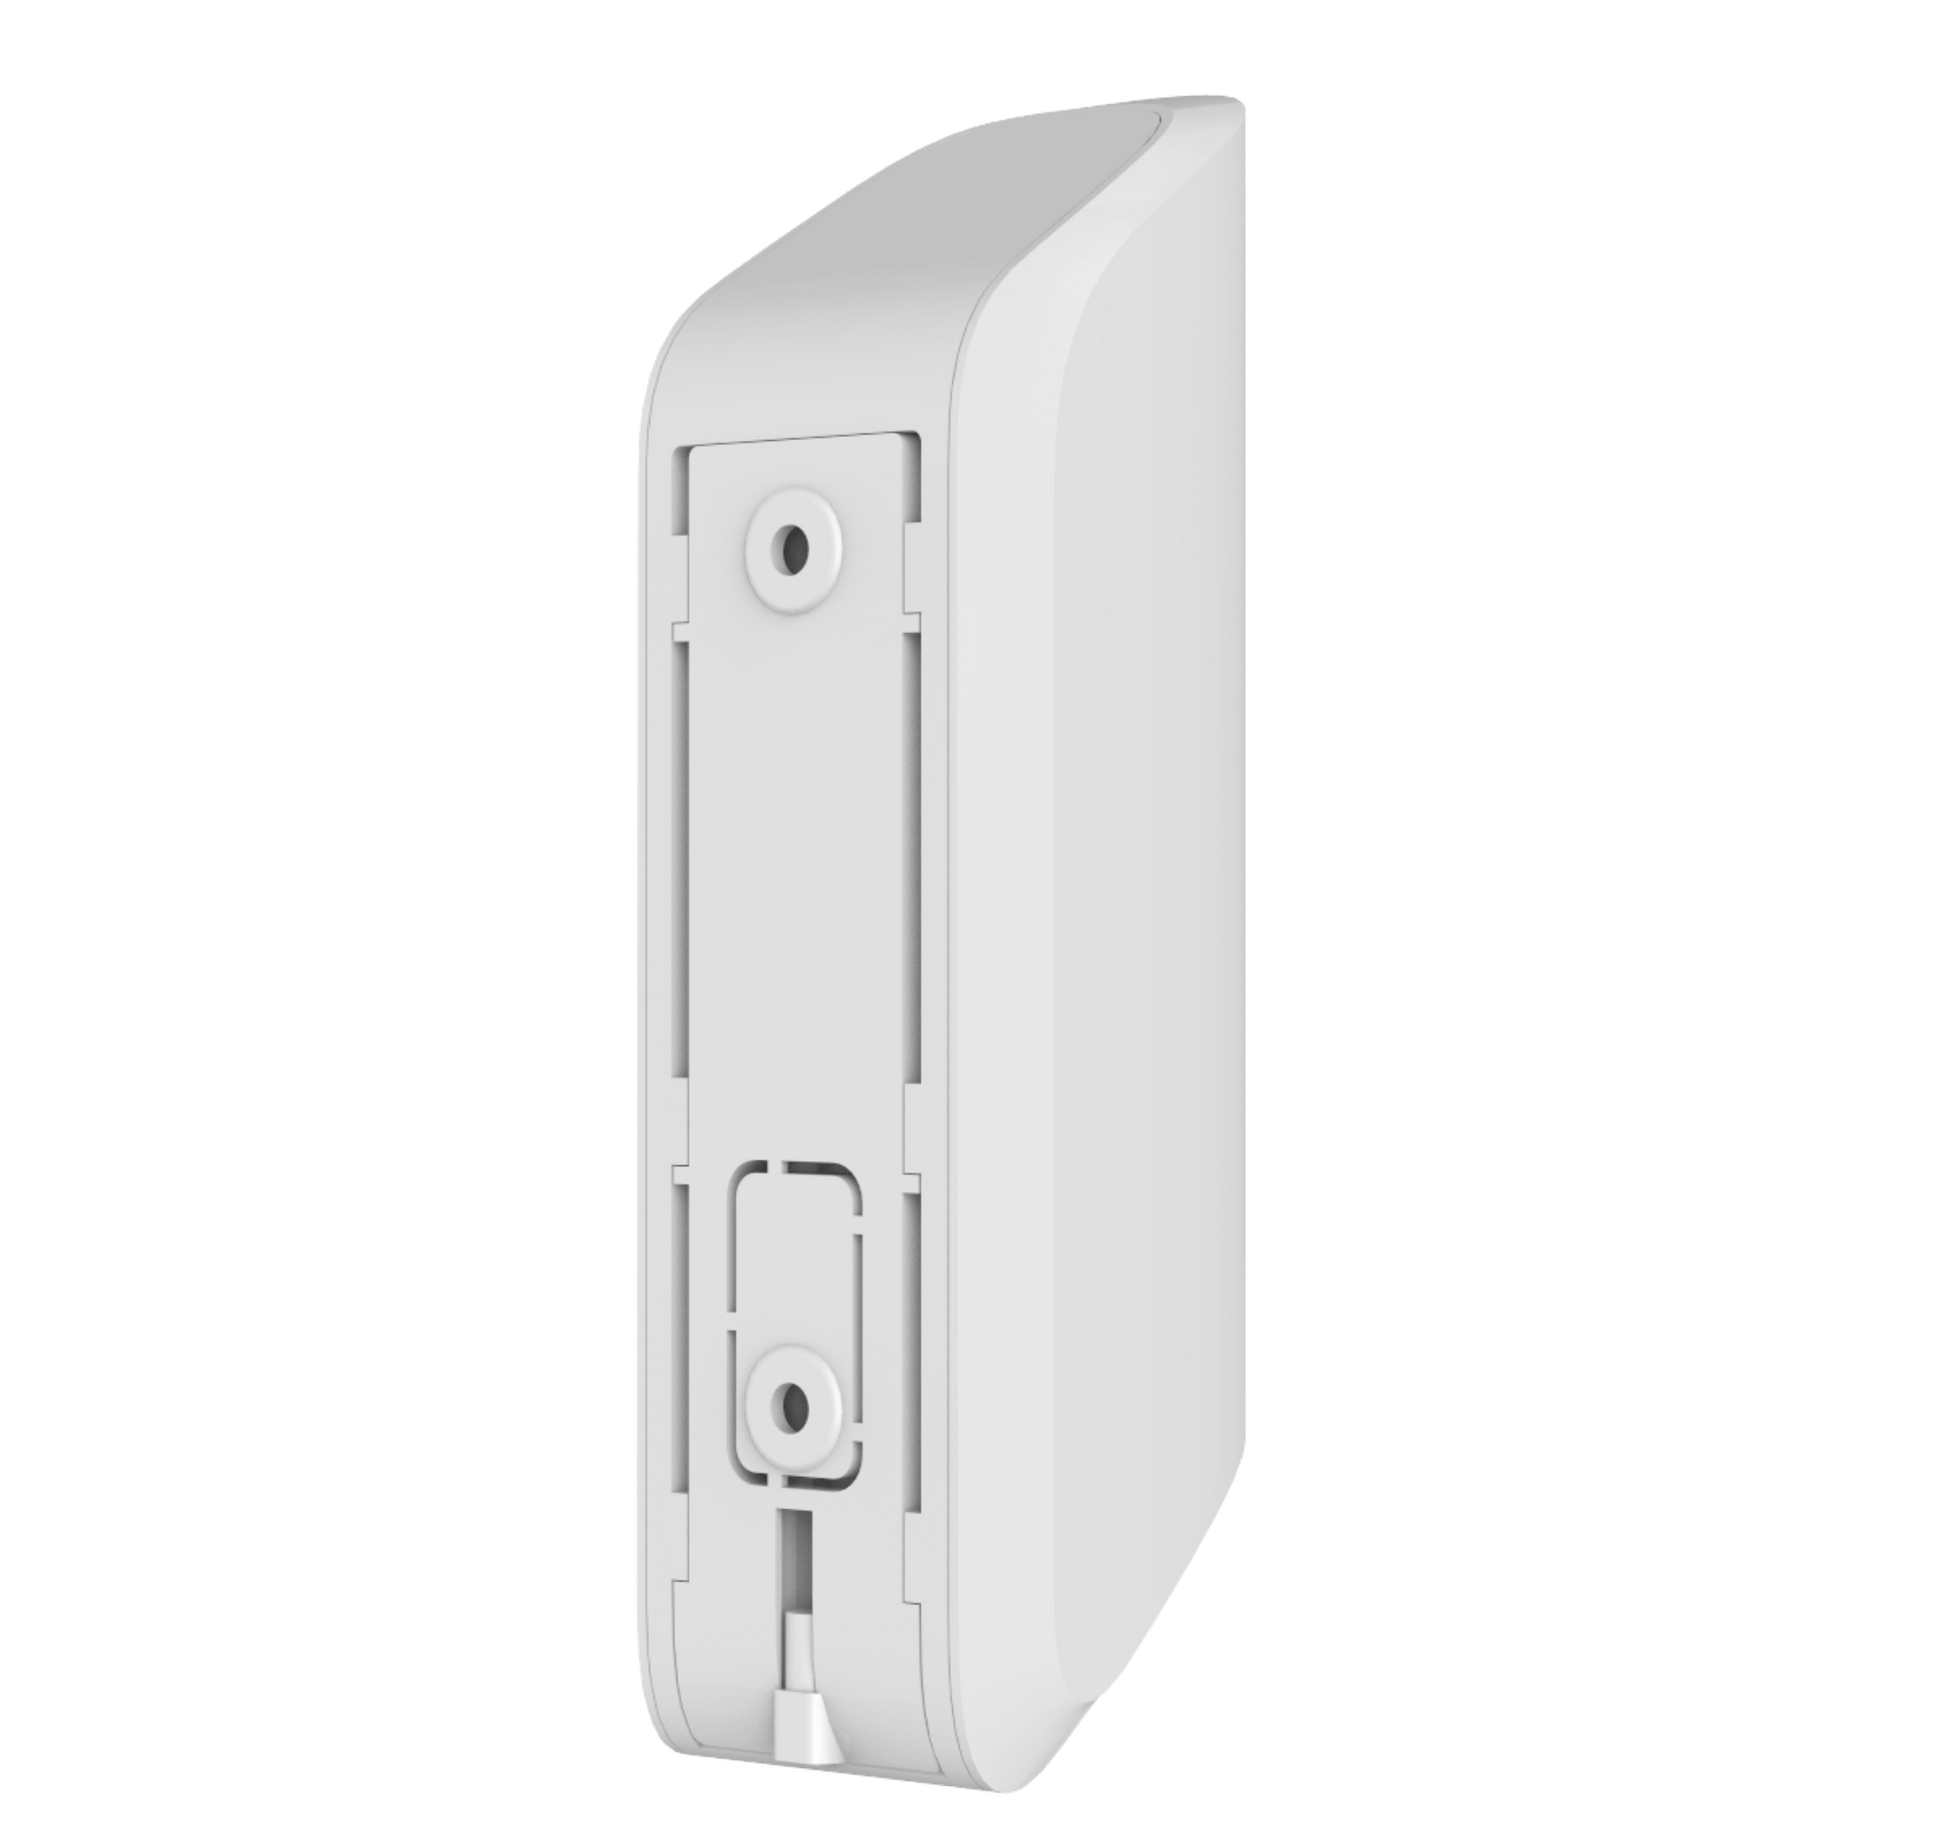 White Ajax MotionProtect Curtain detector a wireless motion detector for business and home security,  134 × 44 × 34 mm in size , 118grams in weight, Backside view of device